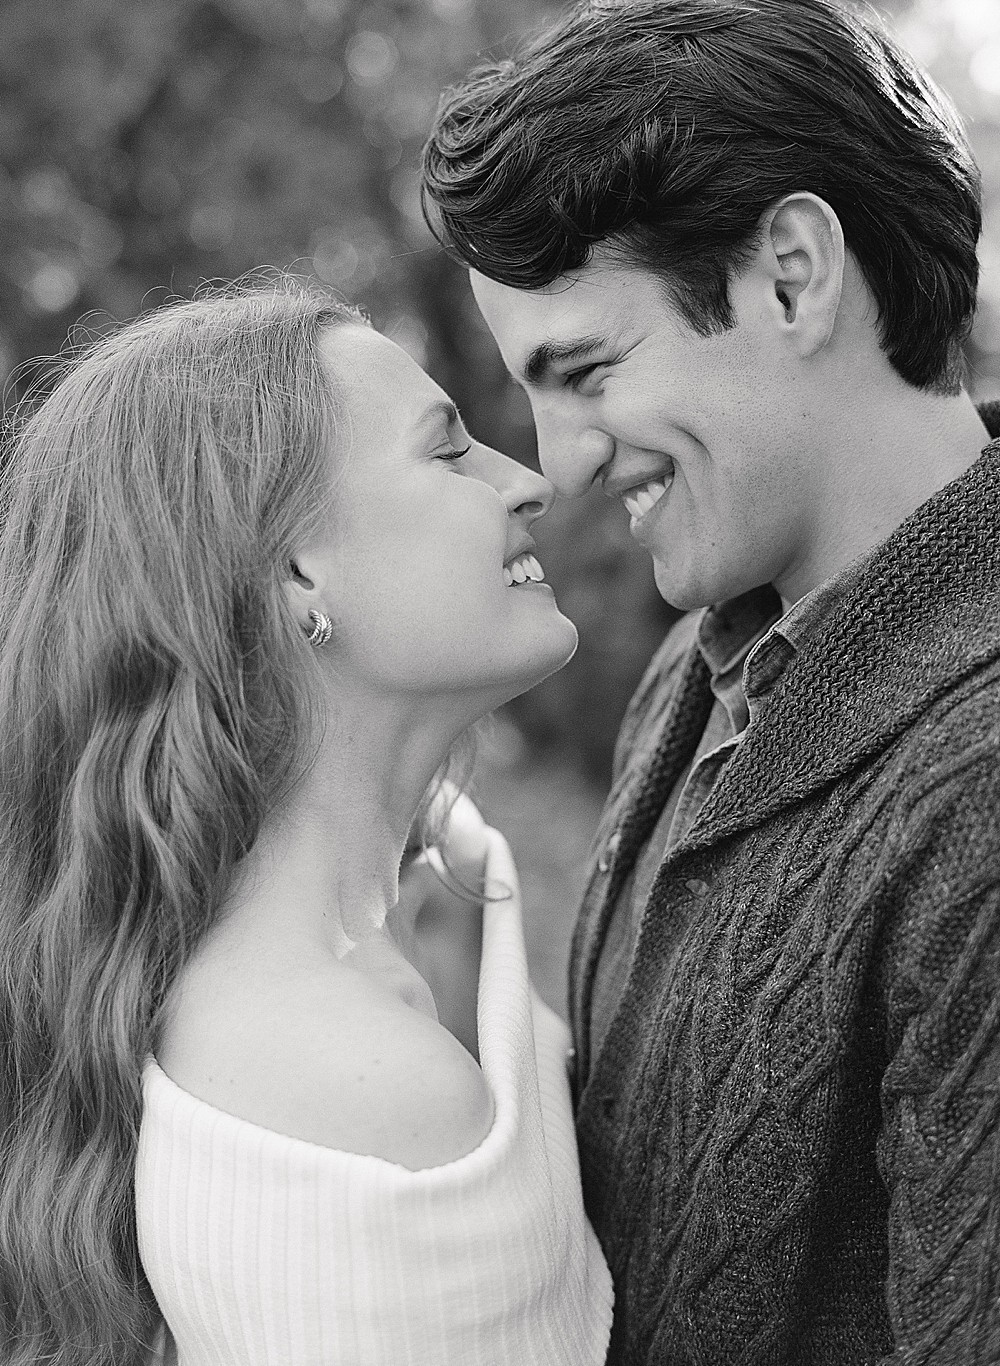 Black and white portrait of an engaged couple nose to nose